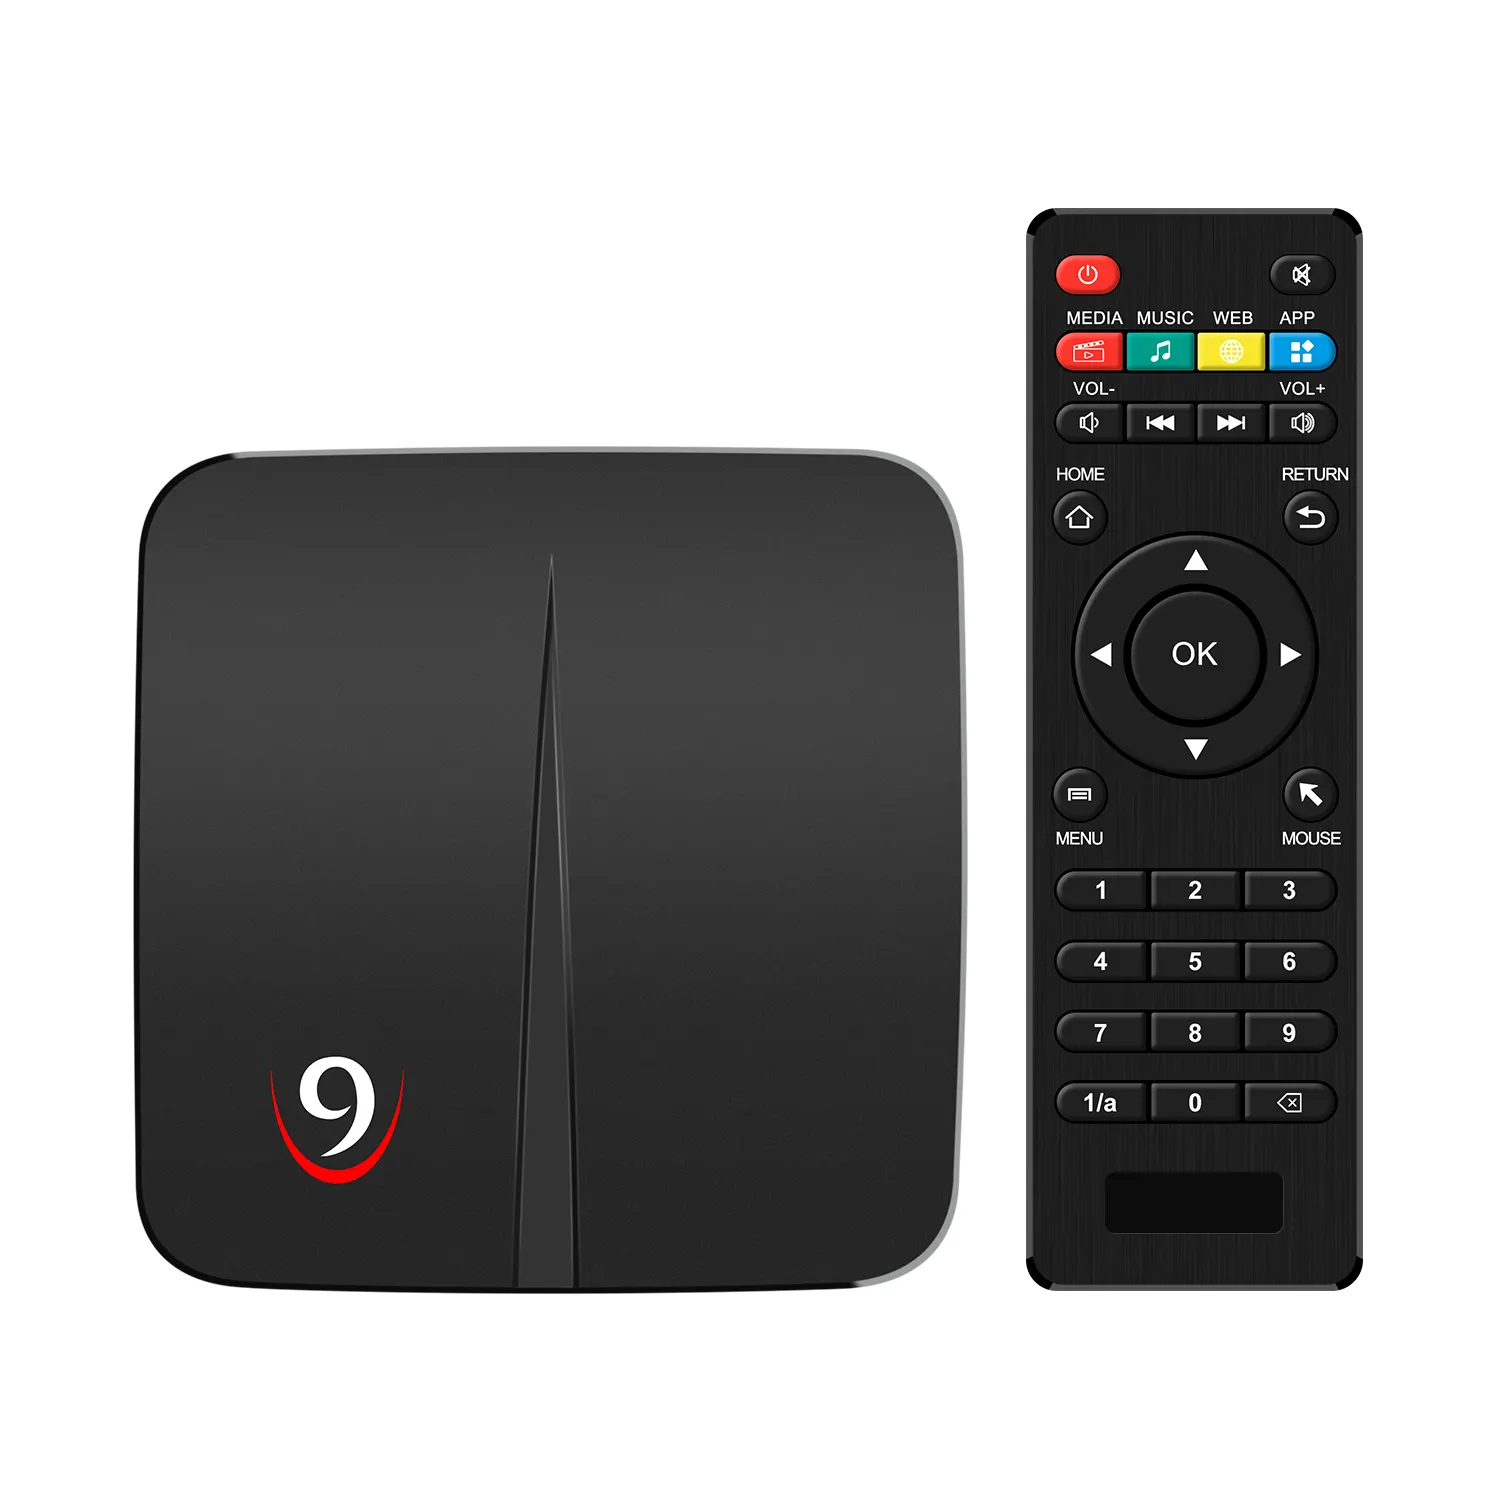 Set Top Box Digital TV Receiver & USB HD Recorder DVB-T2 Terrestrial Tuner Analogue to firmware android tv box